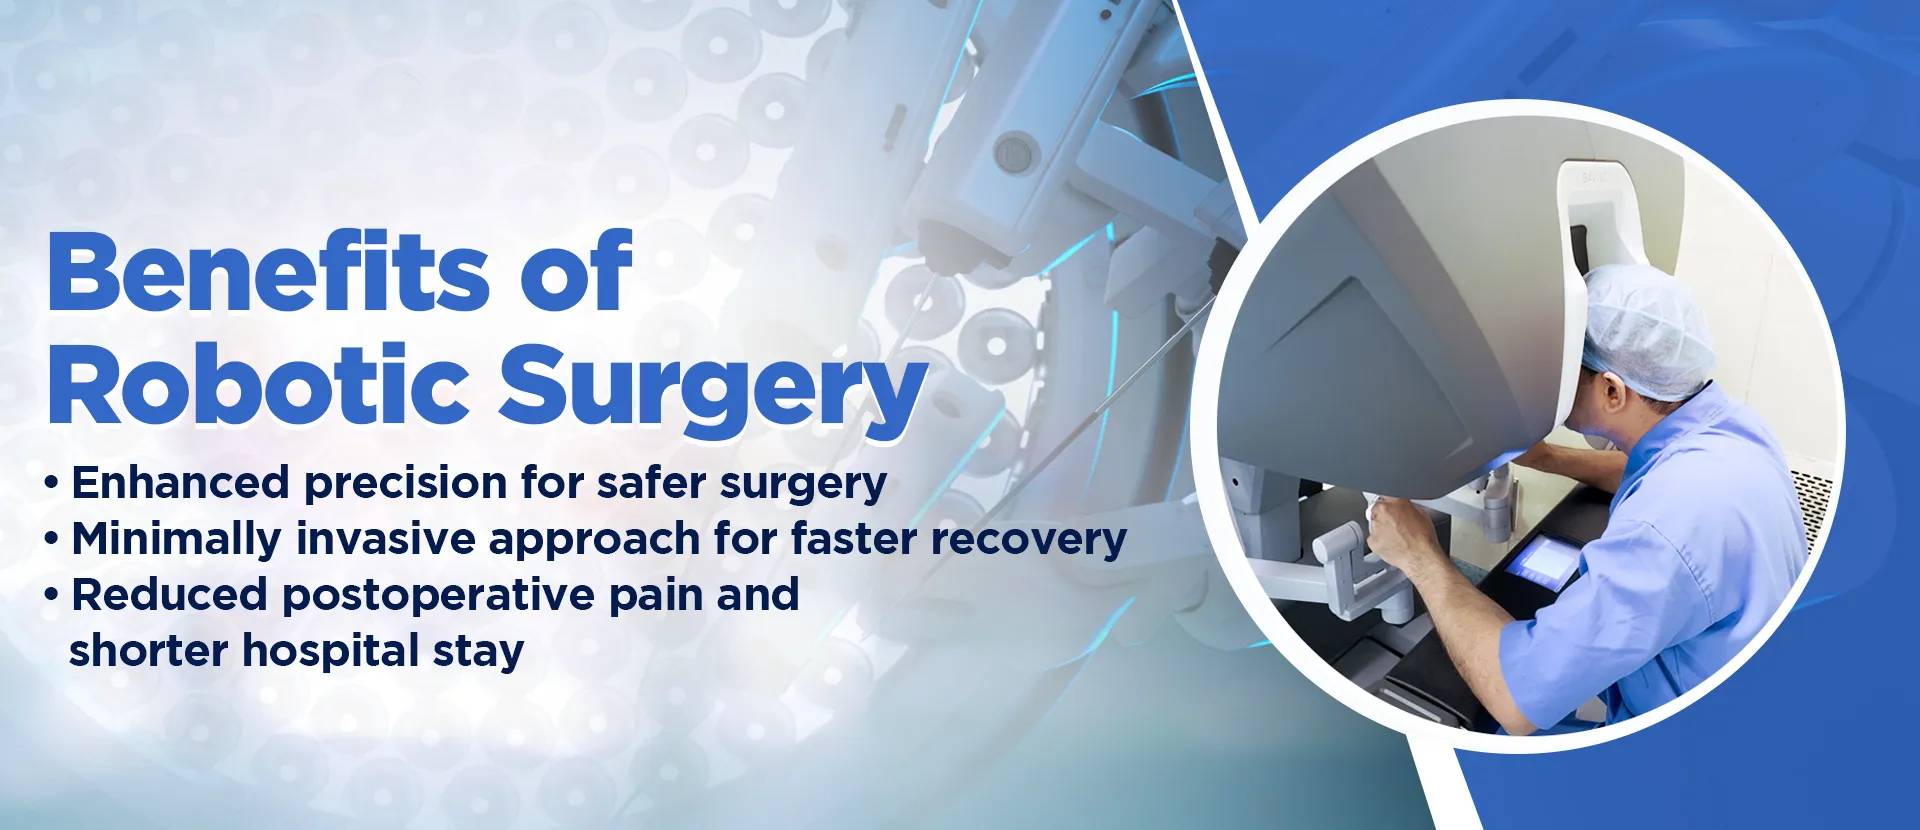 Benefits of Robotic surgery by Dr Harsh Shah